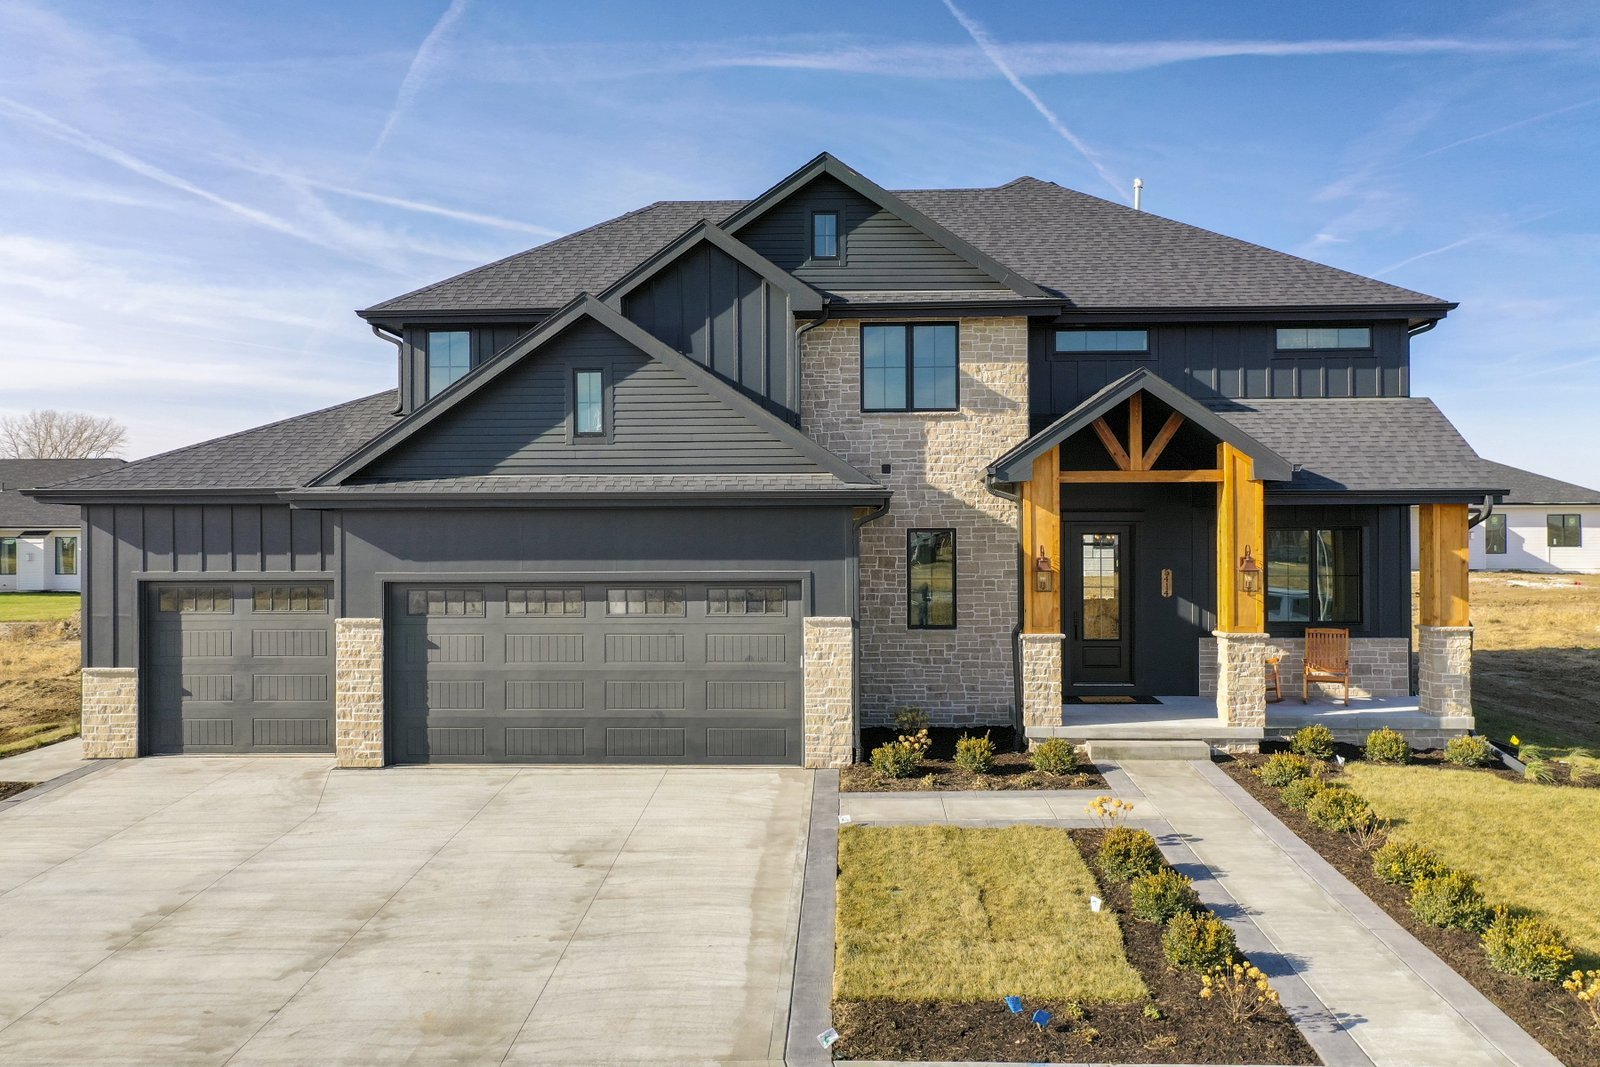 curb view of The Heidi, a custom built home by Omaha's Citadel Signature Homes